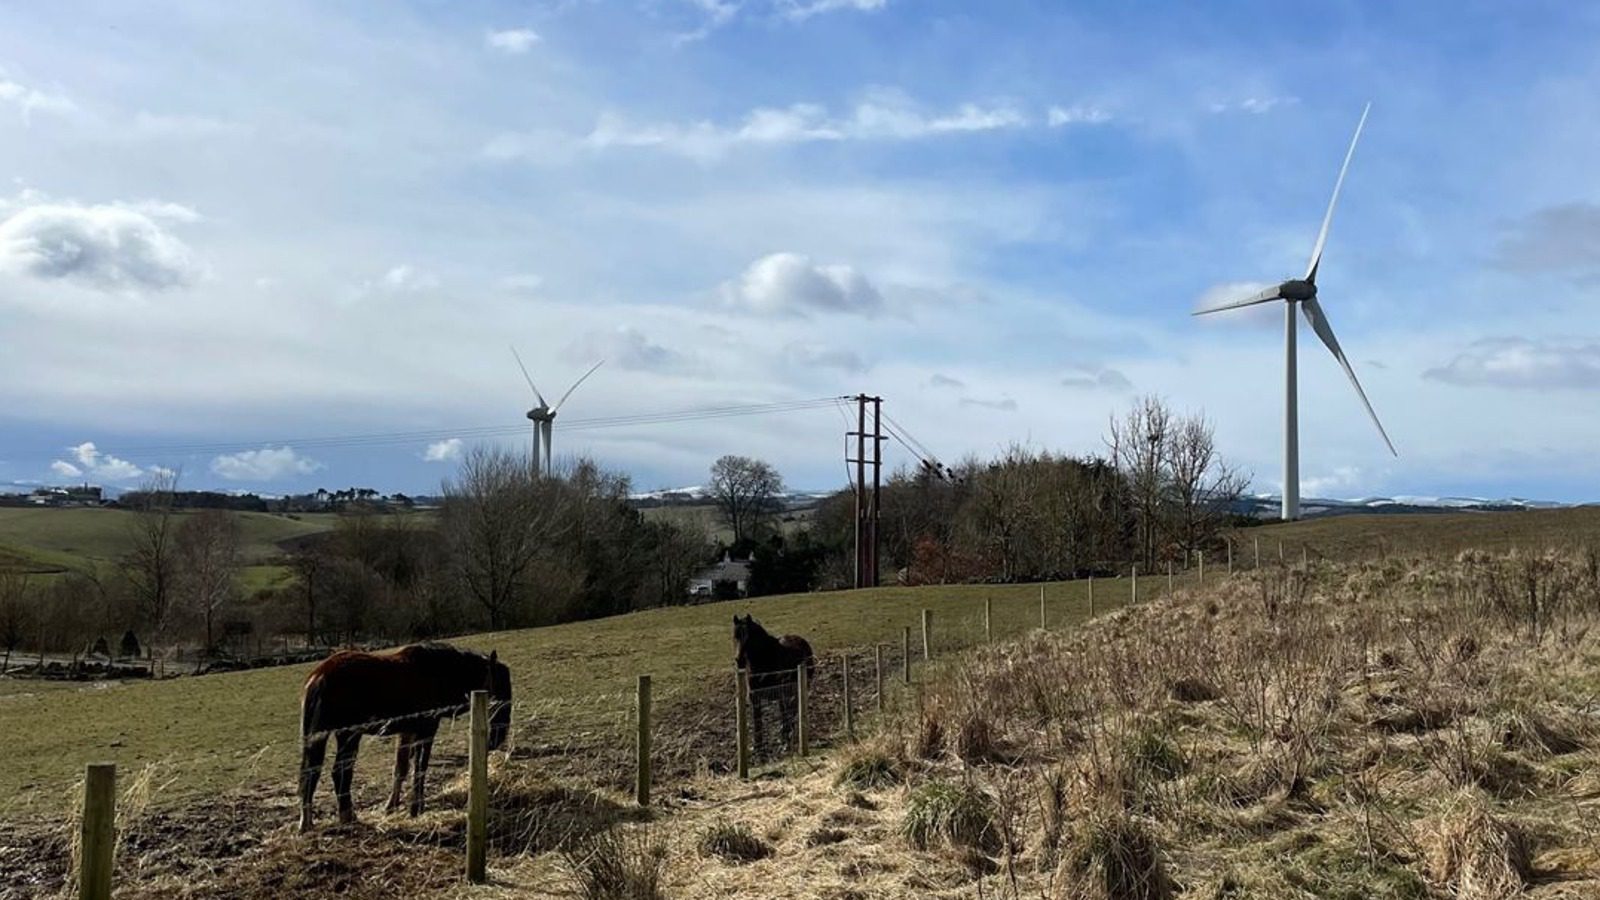 Two wind turbines at Binn Eco Park; horses graze in the foreground.